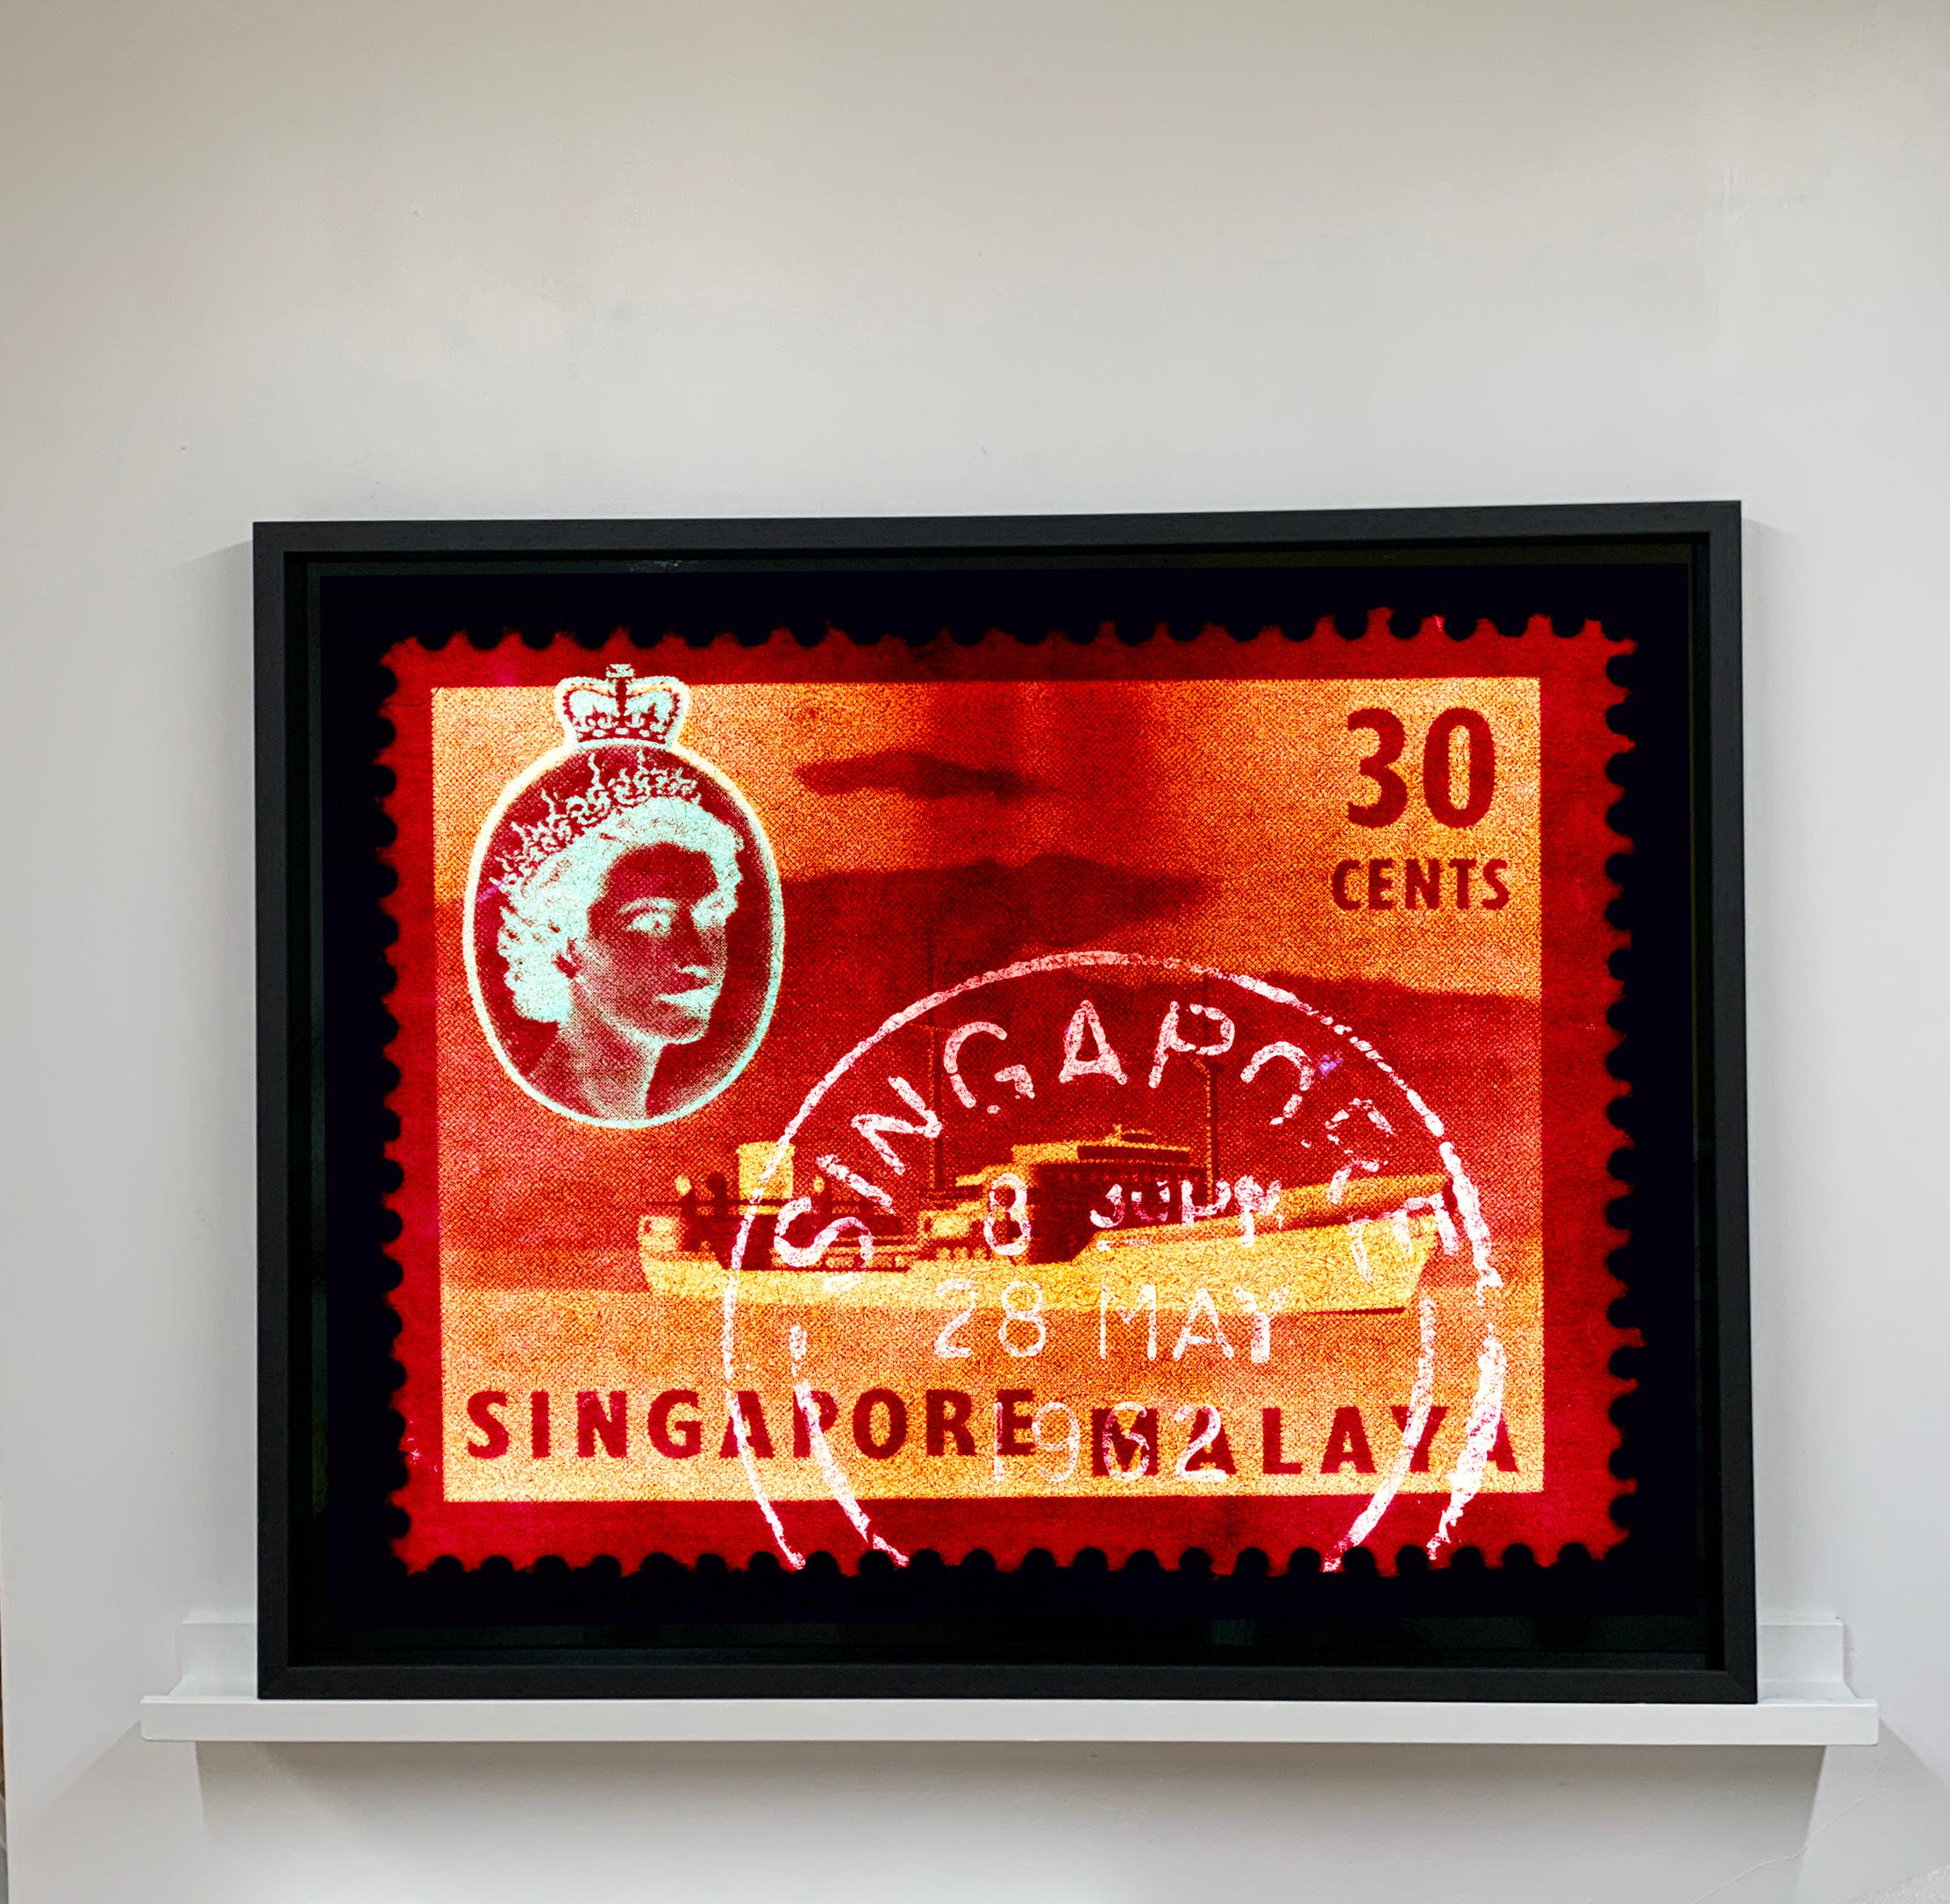 Singapore Stamp Collection, 30 Cents QEII Oil Tanker Red - Pop Art Color Photo - Photograph by Heidler & Heeps